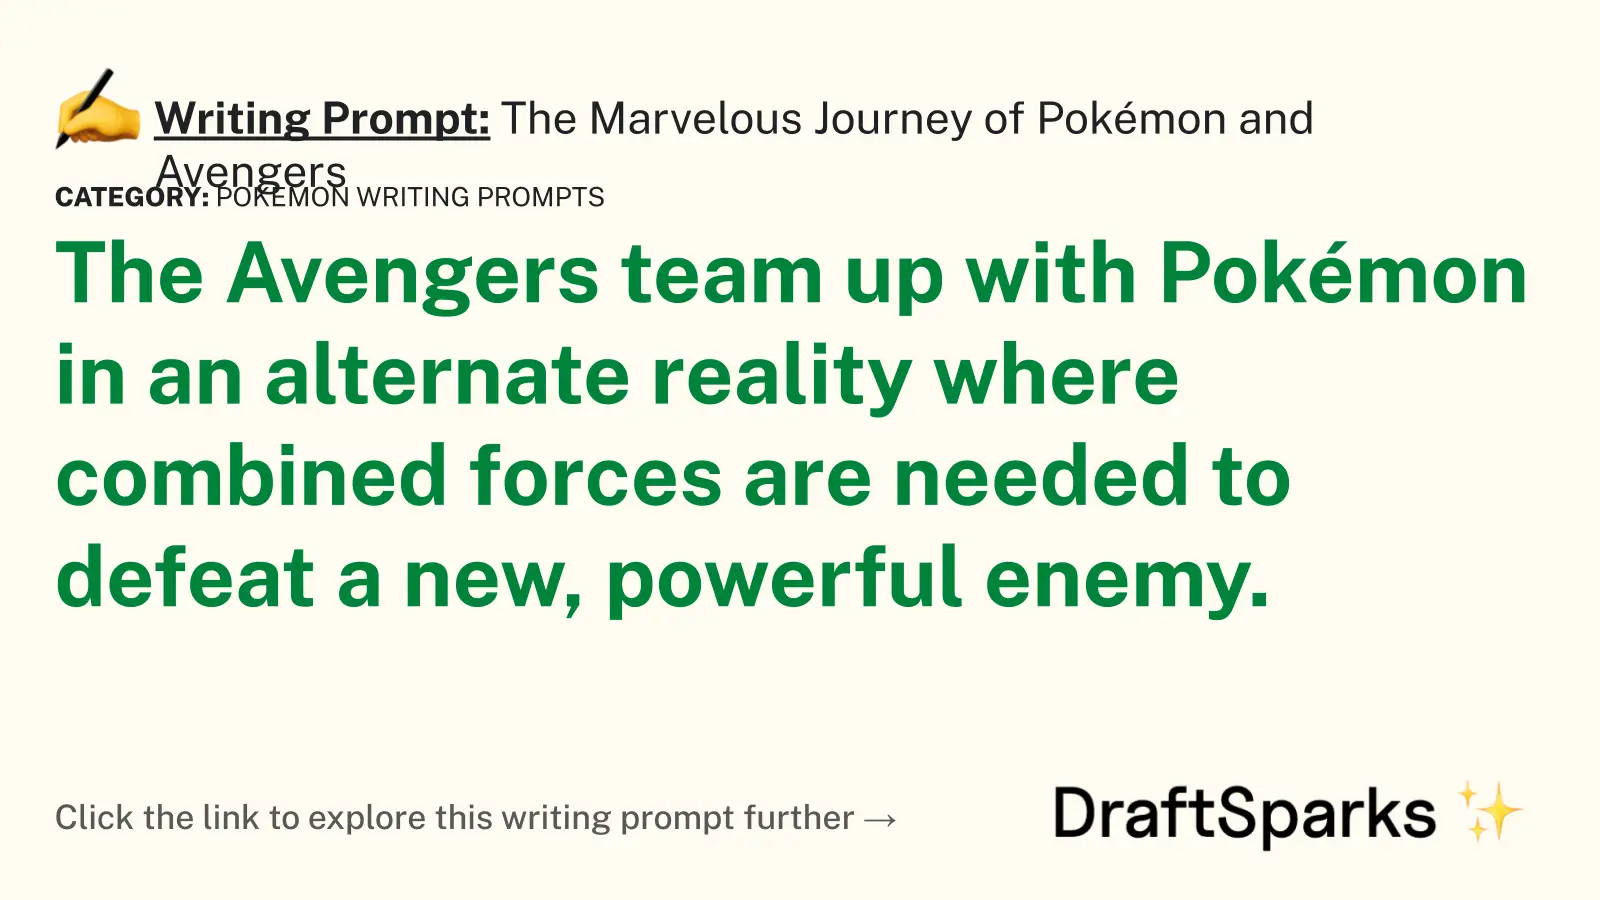 The Marvelous Journey of Pokémon and Avengers